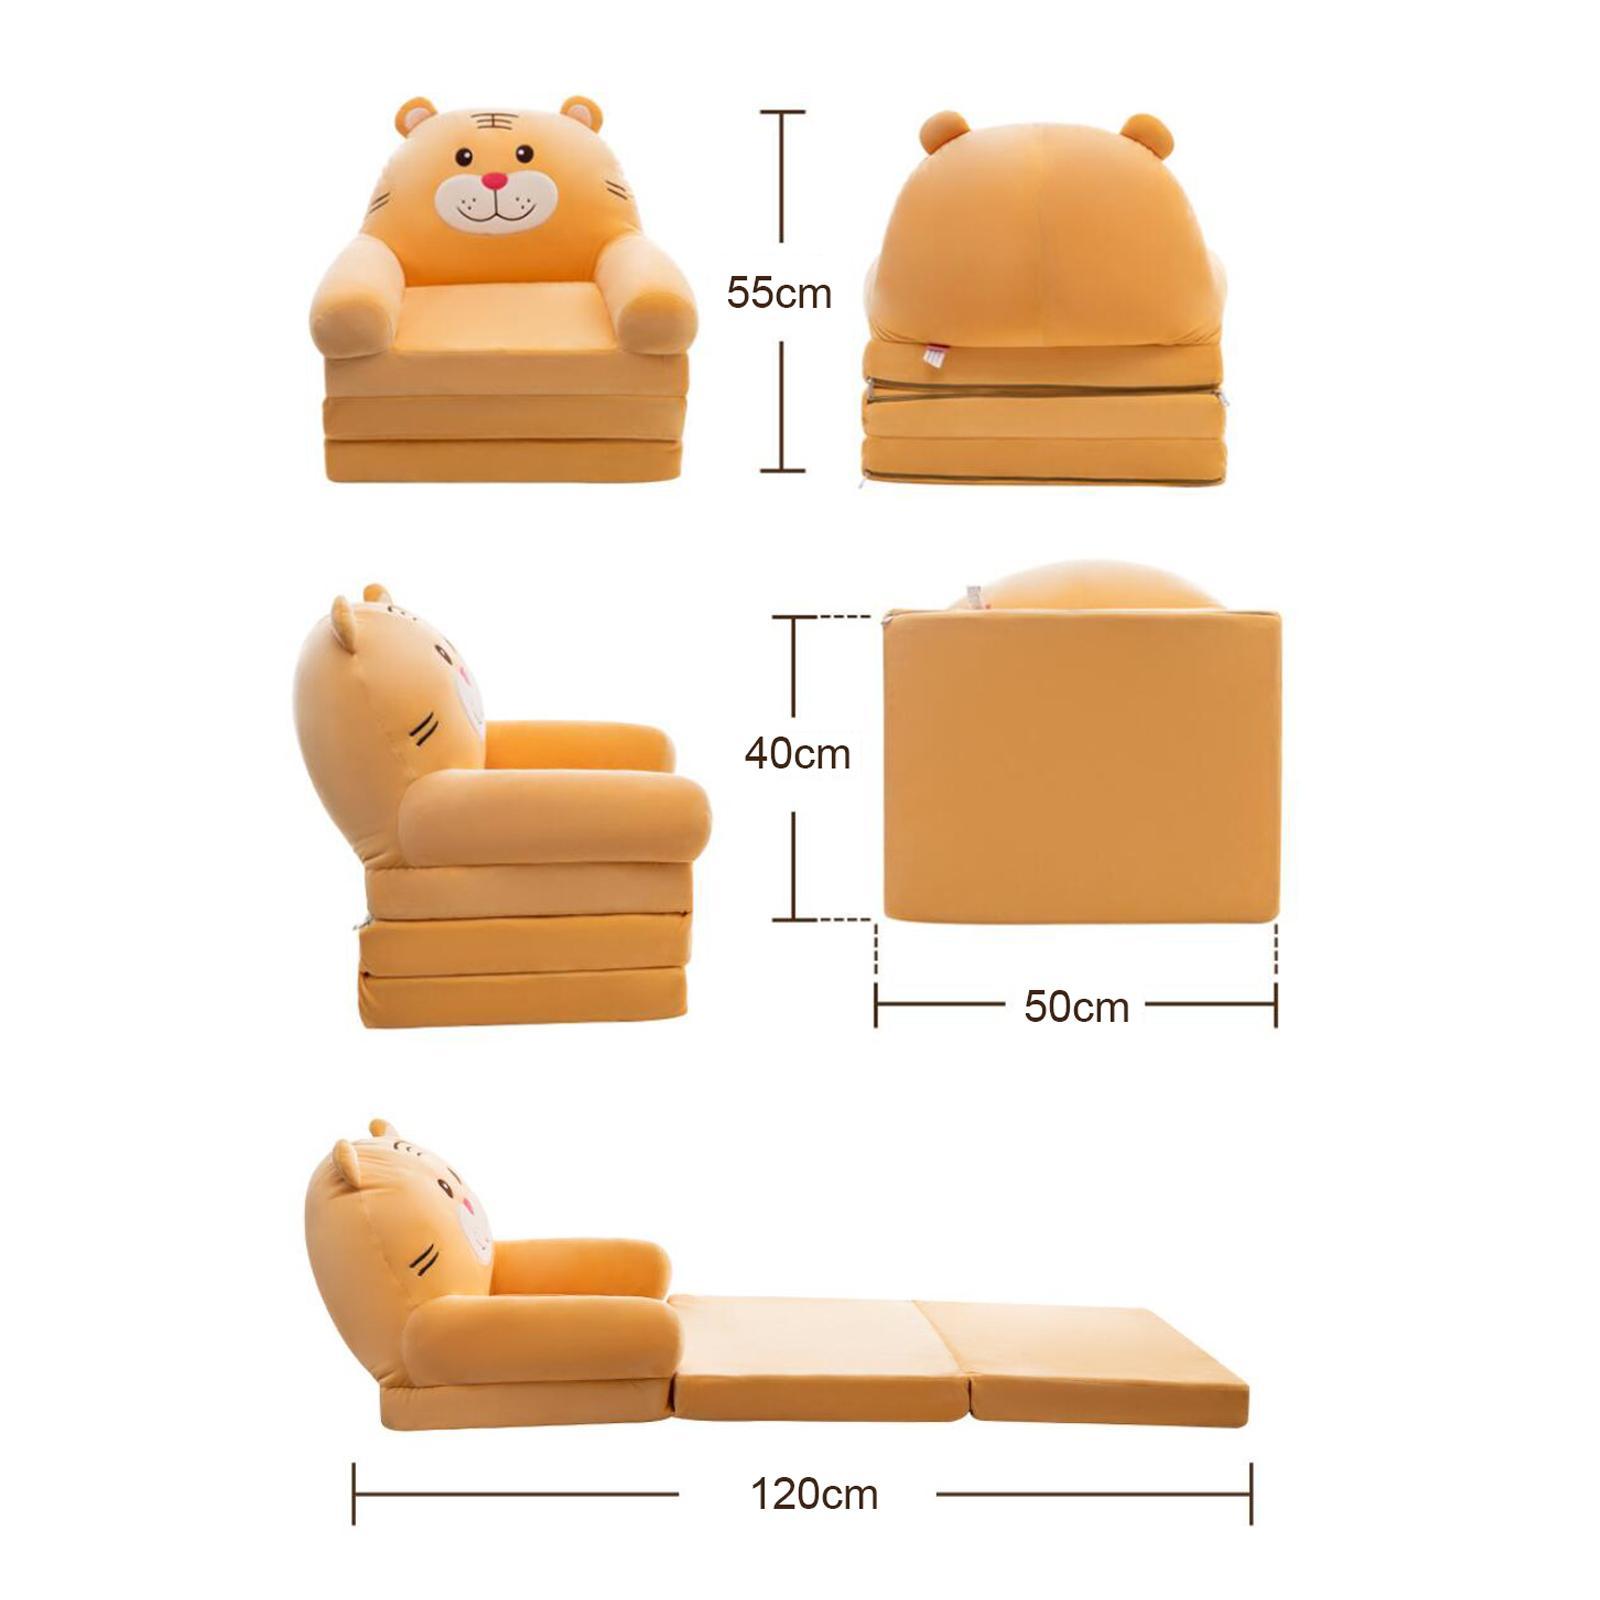 Boys Girls Cartoon Couch Chairs Cover Foldable Lovely Children Chair Seat Slipcover